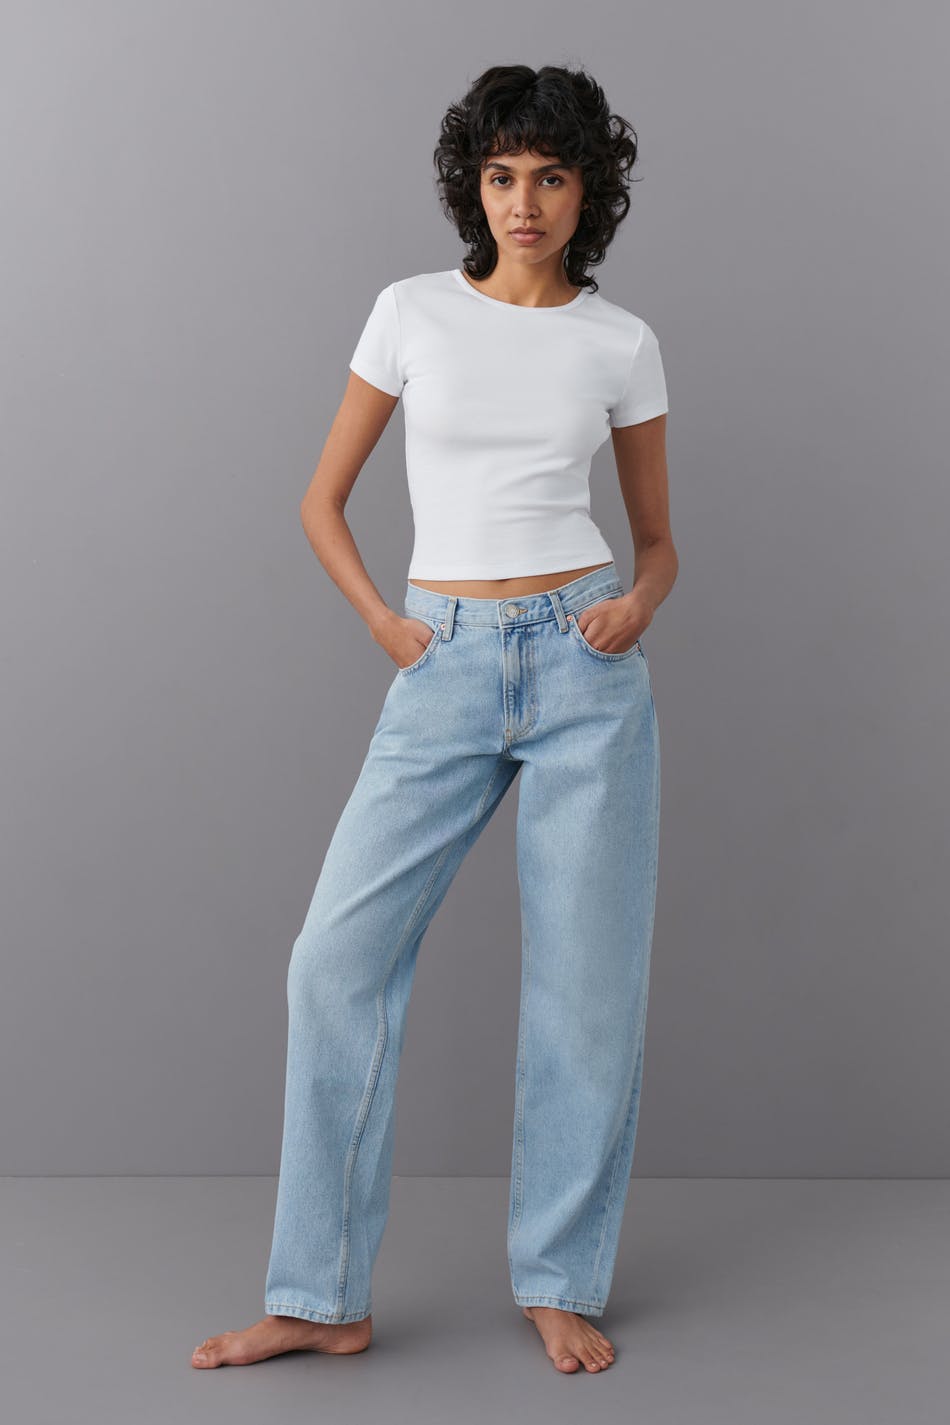 jeans - Blue - Women - Gina Tricot